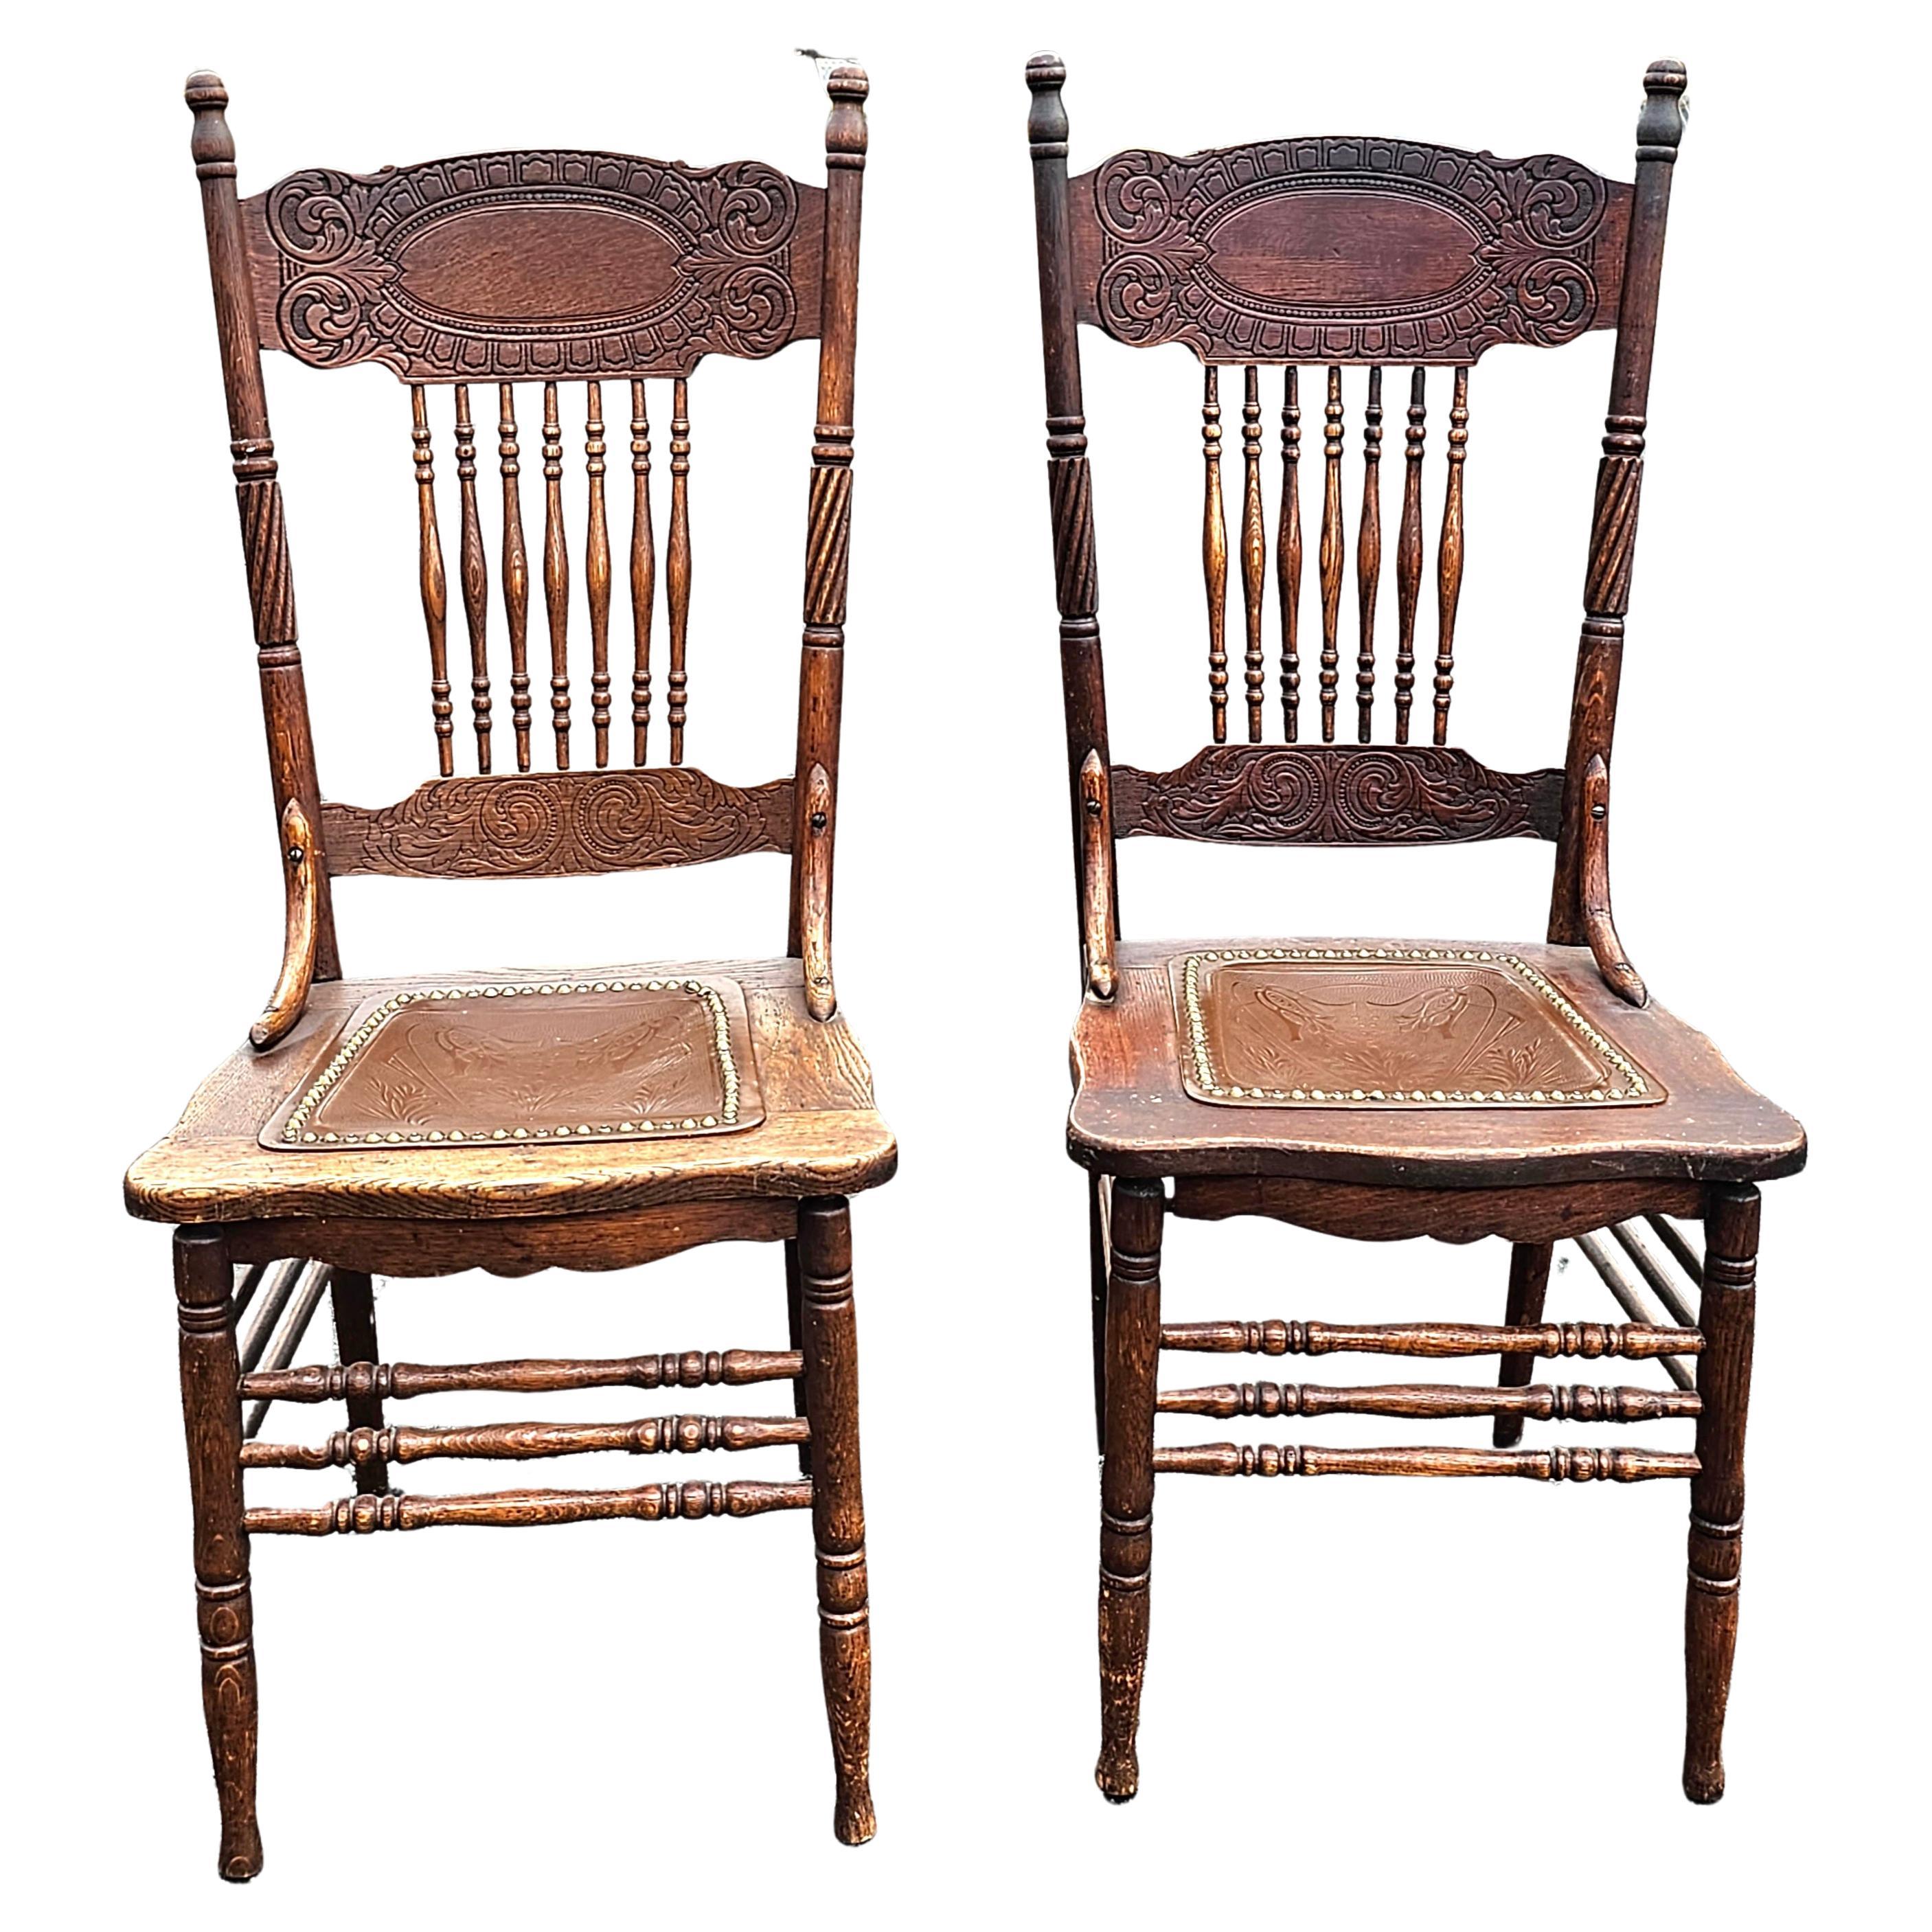 1900s Larkin Soap Co. Spindle Oak & Embossed Leather Cushion Side Chairs, Pair 